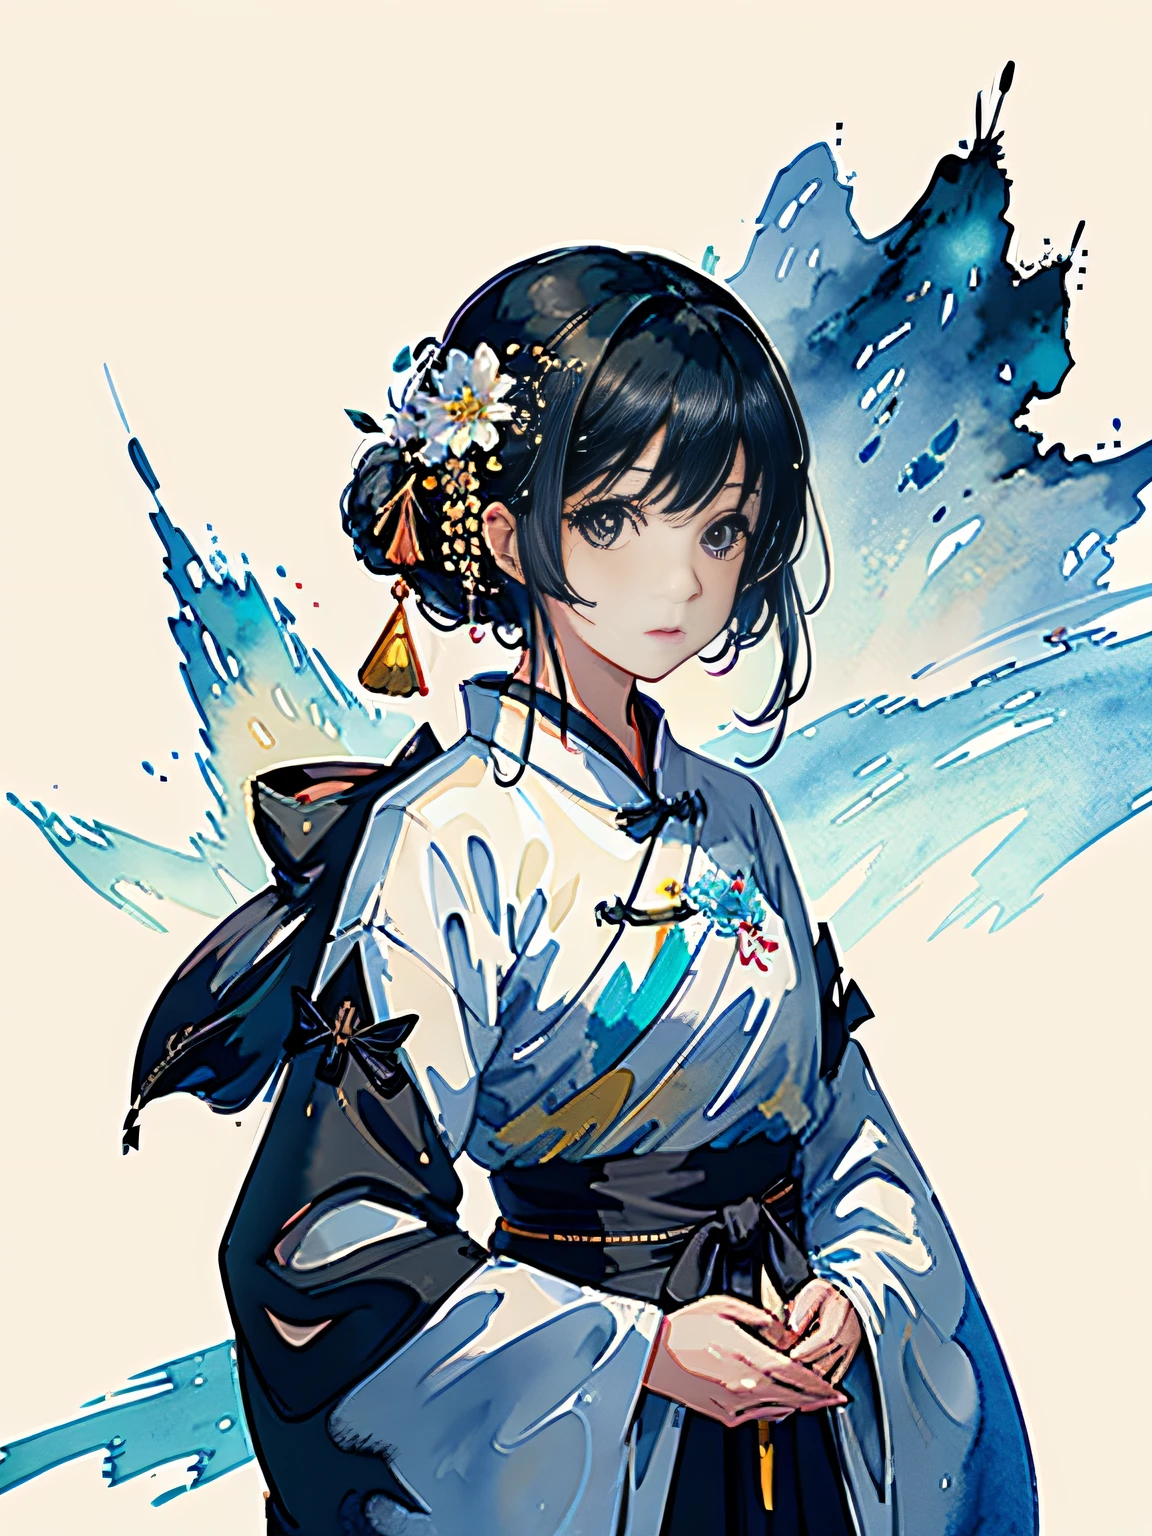 Portrait, Beautiful Avatar, Watercolor, (Illustration: 1.1), (Best Quality), (Masterpiece: 1.1), (Very Detailed CG Unity 8k Wallpaper: 1.1), (Color: 0.9), (Panorama: 1.4), (Full Body: 1.05), (Single: 1.2), (Splash Ink), (Splash Color), ((Watercolor)), Clear and Sharp, {1girl Standing}, ((Chinese Style)), Flower Background, Outdoor, Rock, Looking at the Viewer, Making Happy Expressions, Soft Smile , pure, beautiful detailed face and eyes, beautiful intricate clothing pattern details, black hair, black eyes, colorful watercolor